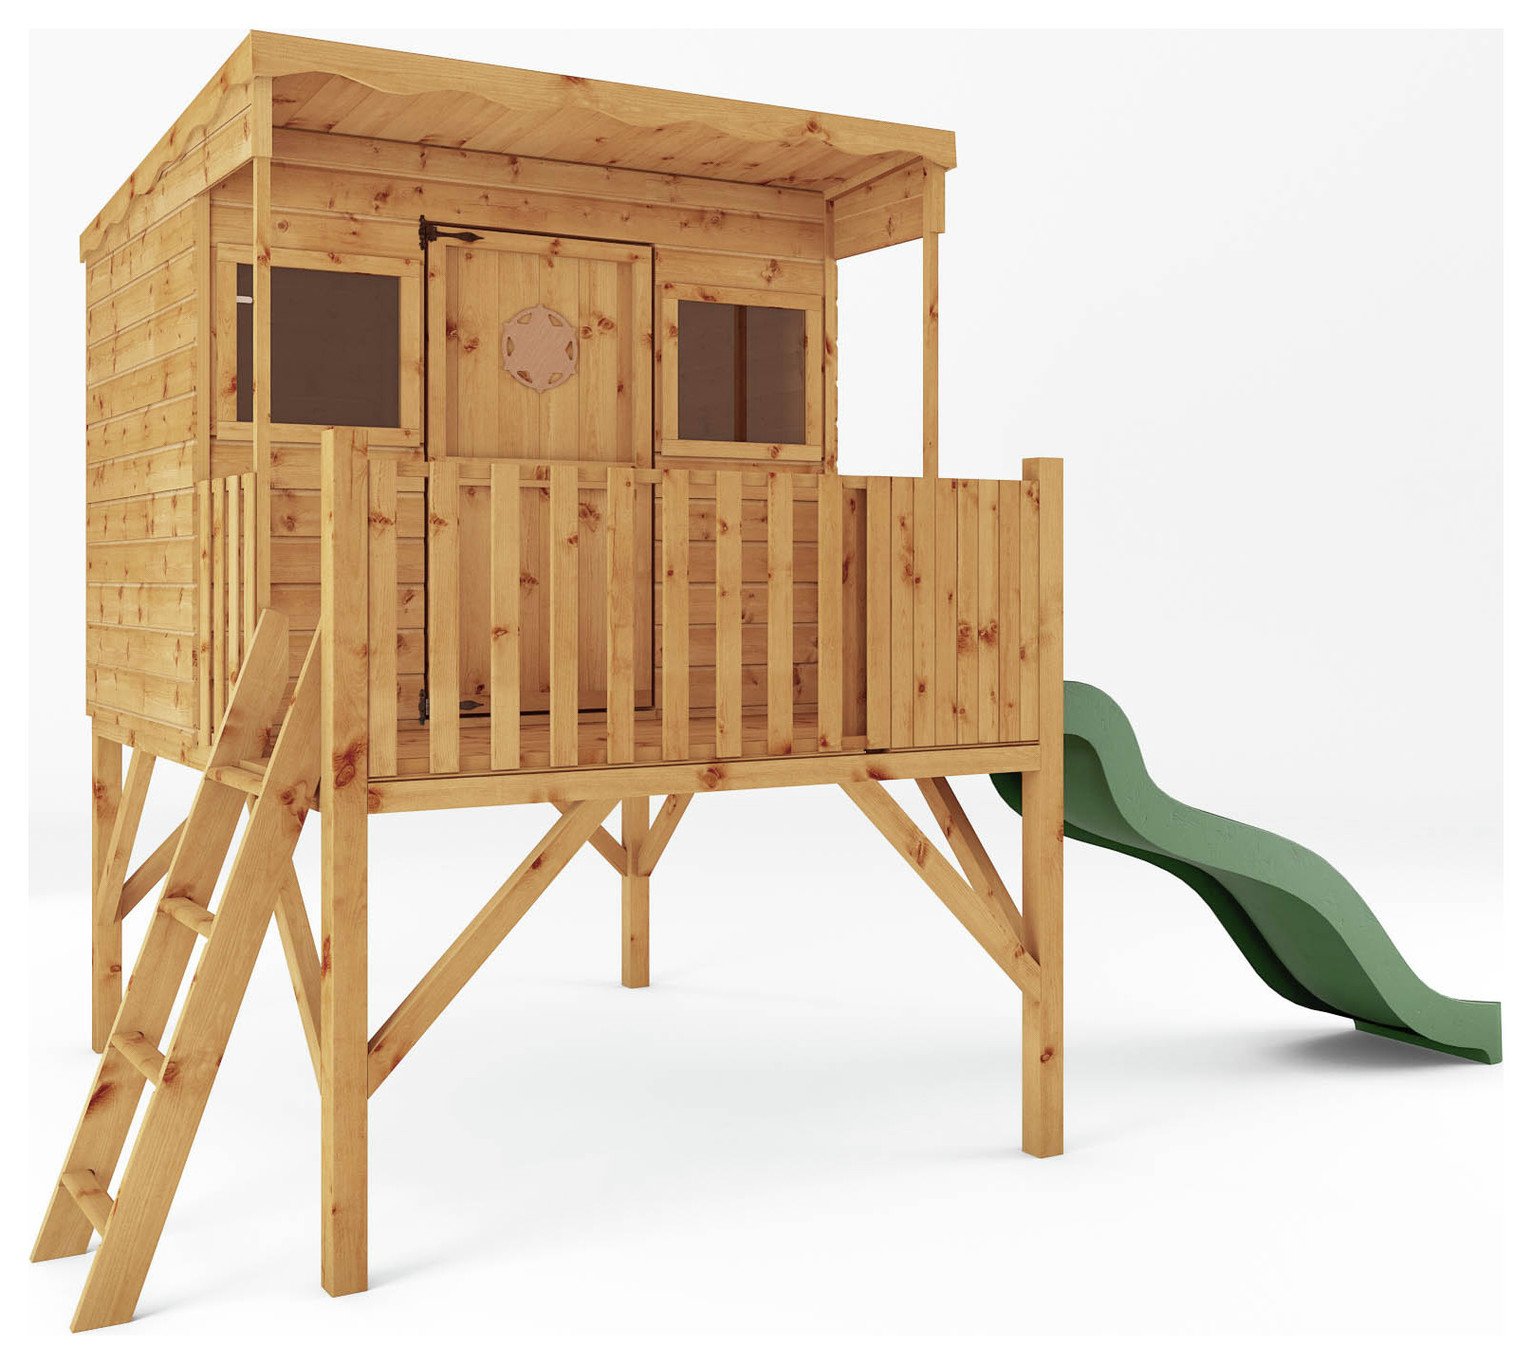 Mercia Garden Products Wooden Playhouse With Tower Slide 